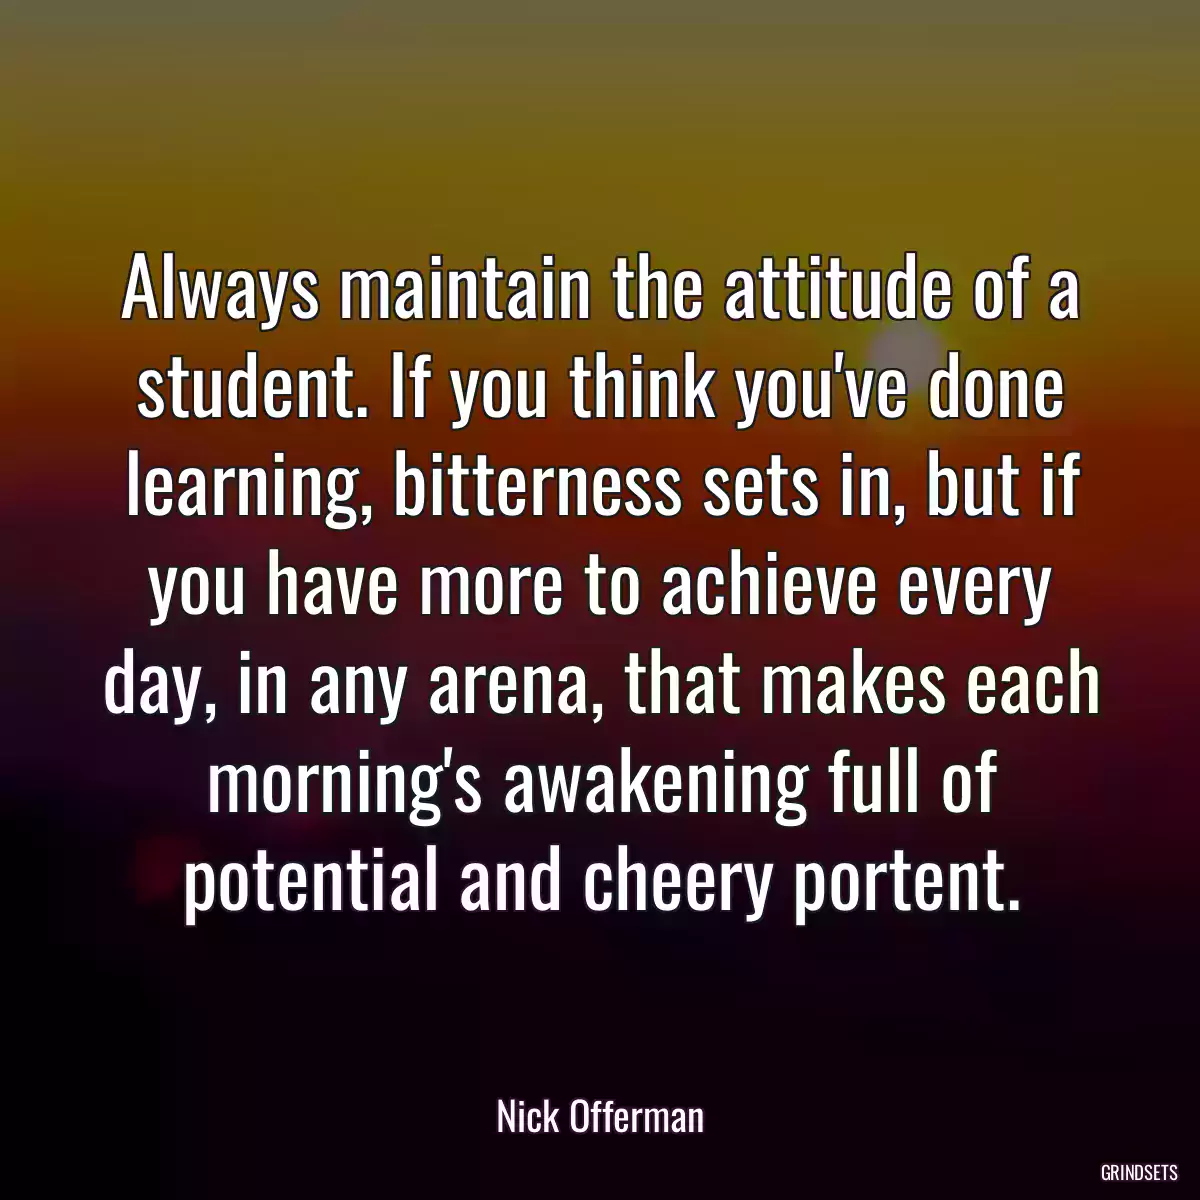 Always maintain the attitude of a student. If you think you\'ve done learning, bitterness sets in, but if you have more to achieve every day, in any arena, that makes each morning\'s awakening full of potential and cheery portent.